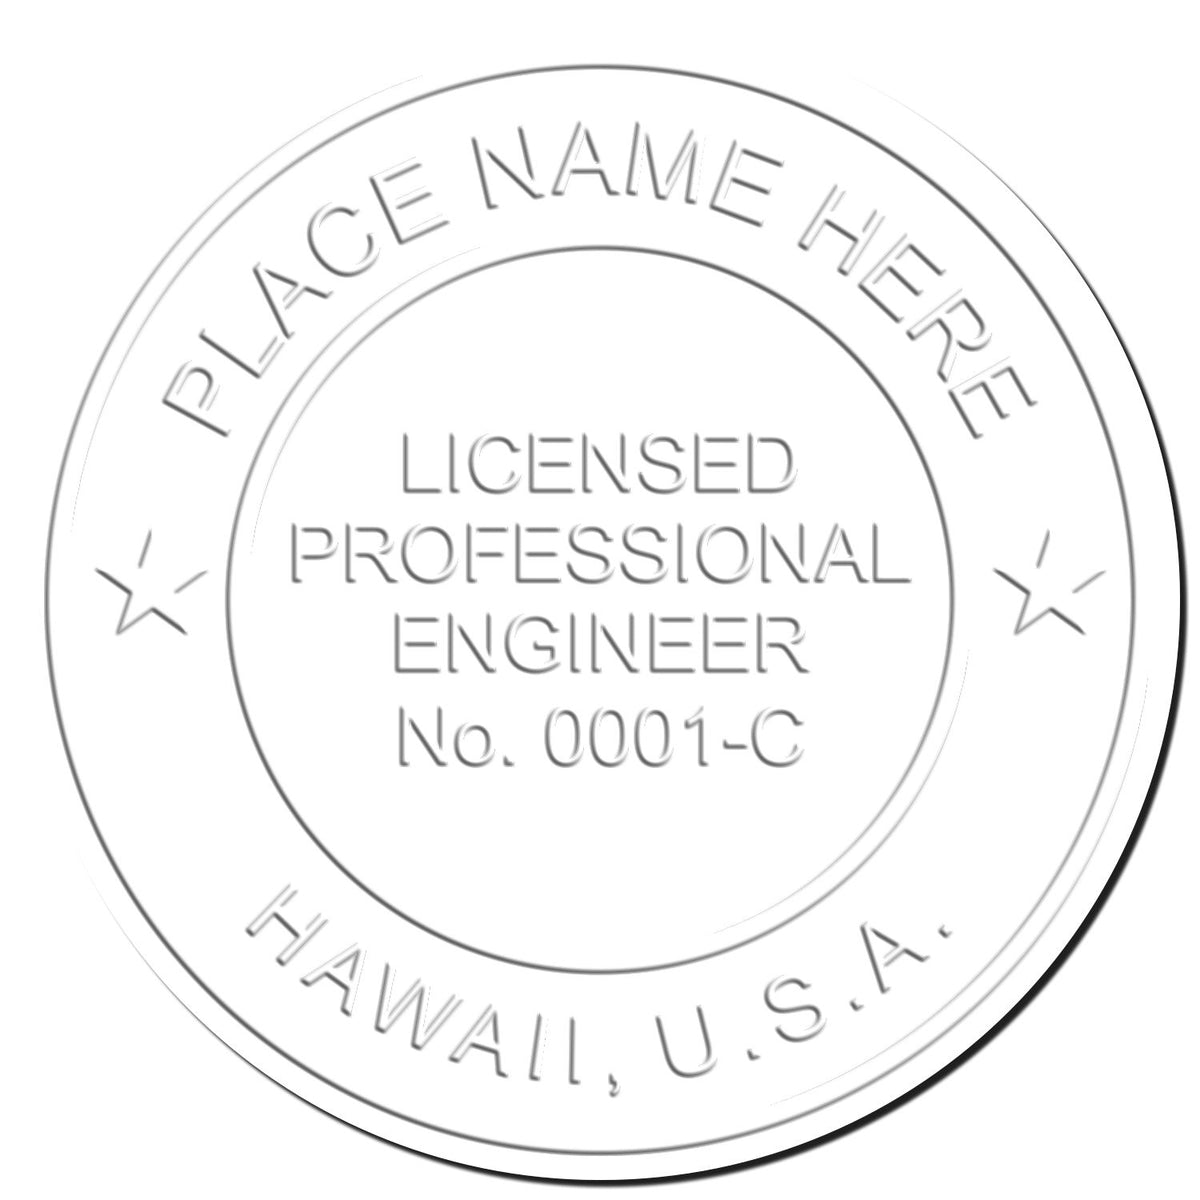 Another Example of a stamped impression of the Hawaii Engineer Desk Seal on a piece of office paper.